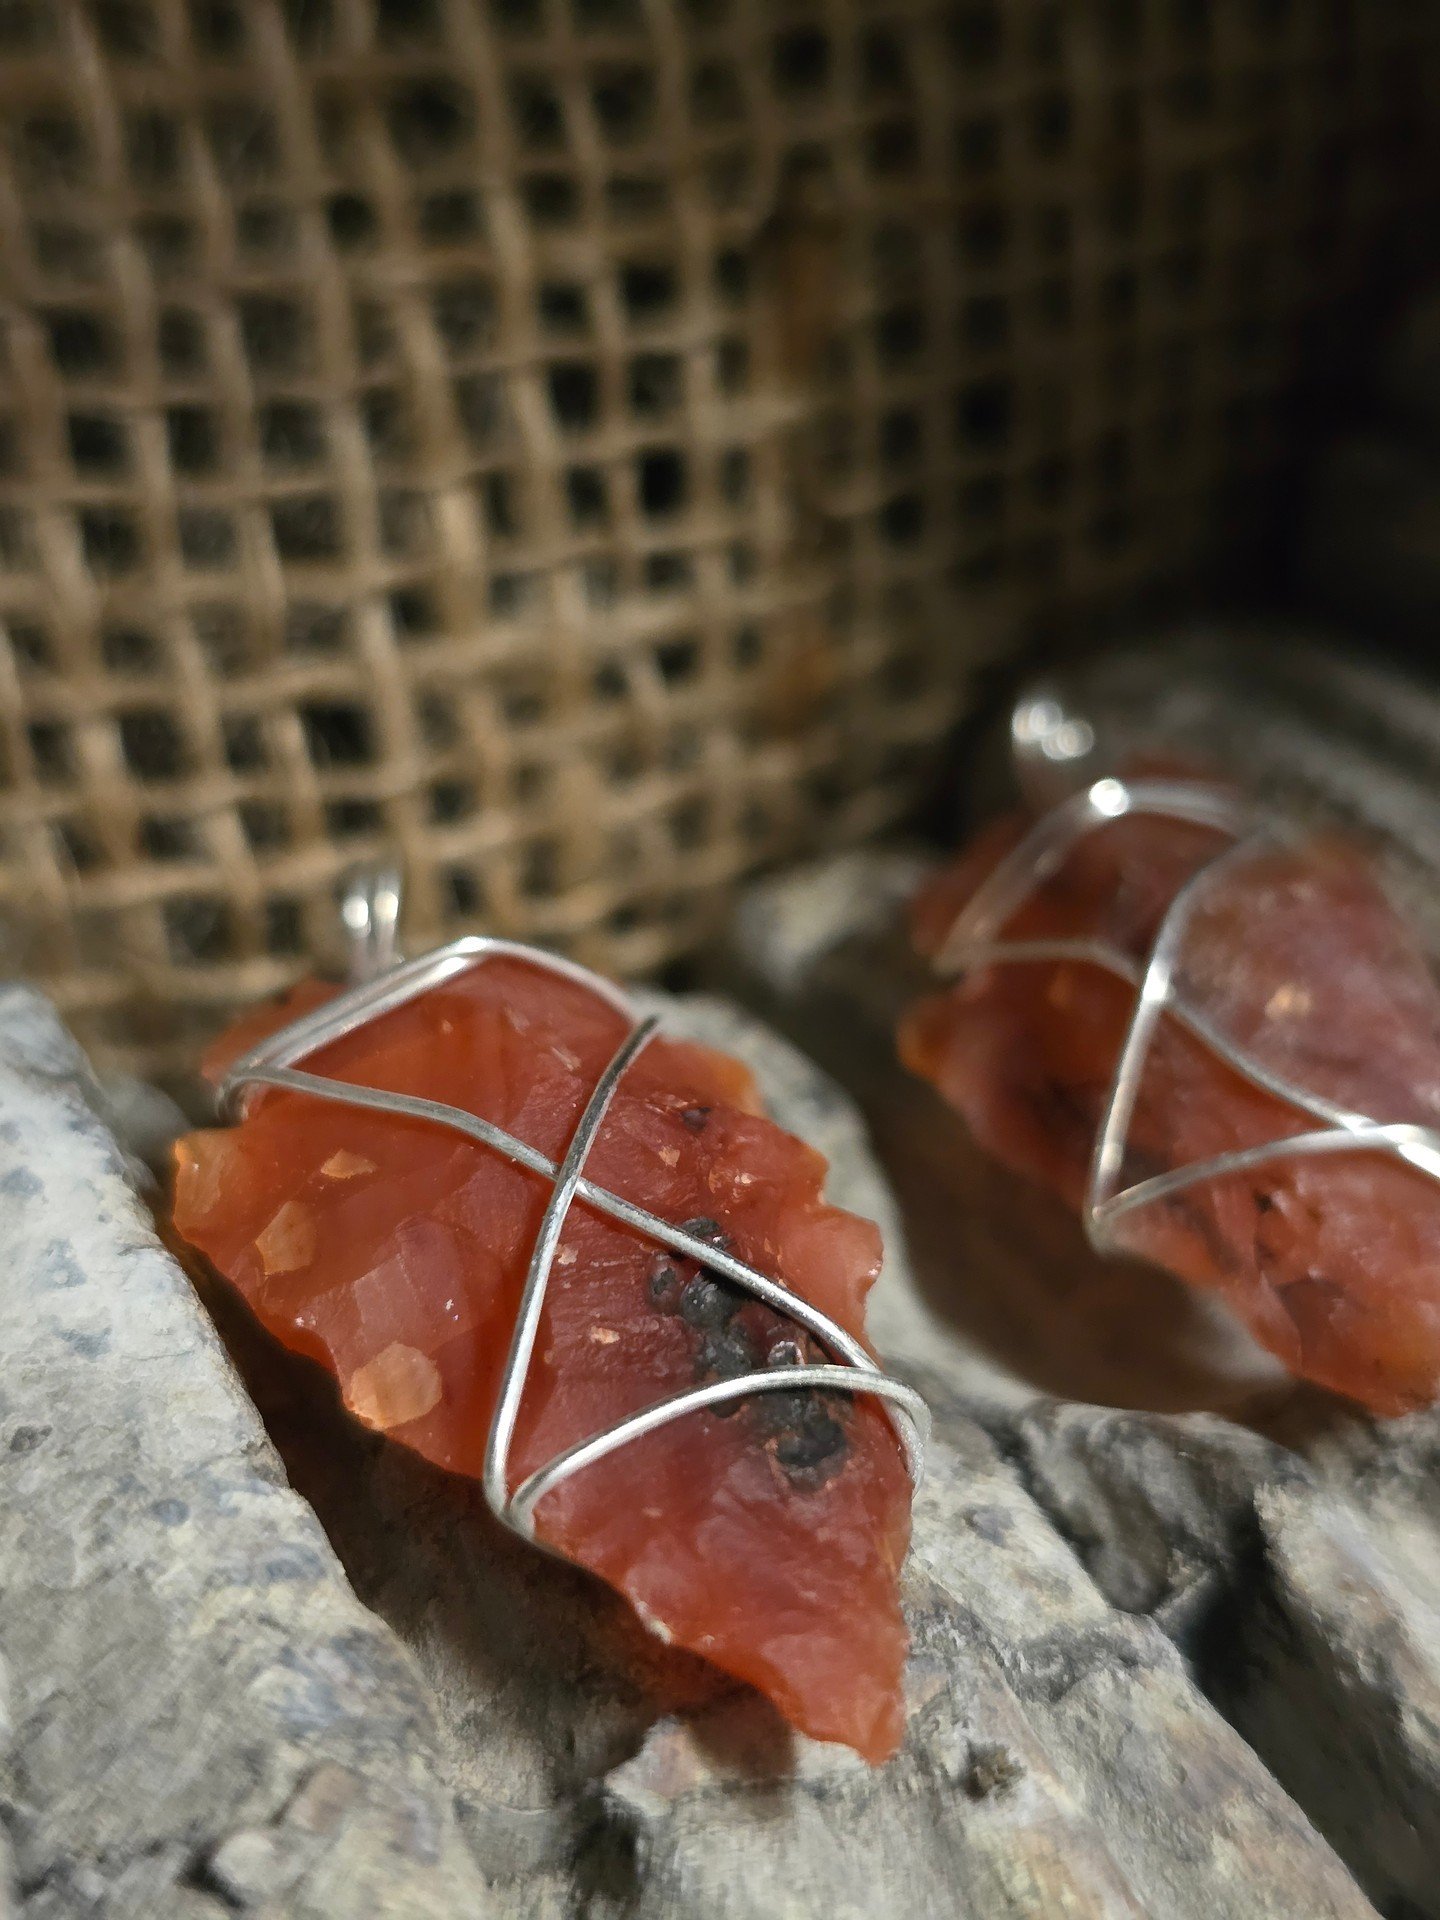 💐 Mother's Day is Tomorrow and we have a FREE Carnelian Arrowhead Pendant with your name on it. Discover the vibrant energy of Carnelian with our special Mother's Day offer! Renowned for boosting vitality and courage, Carnelian is believed to enhanc